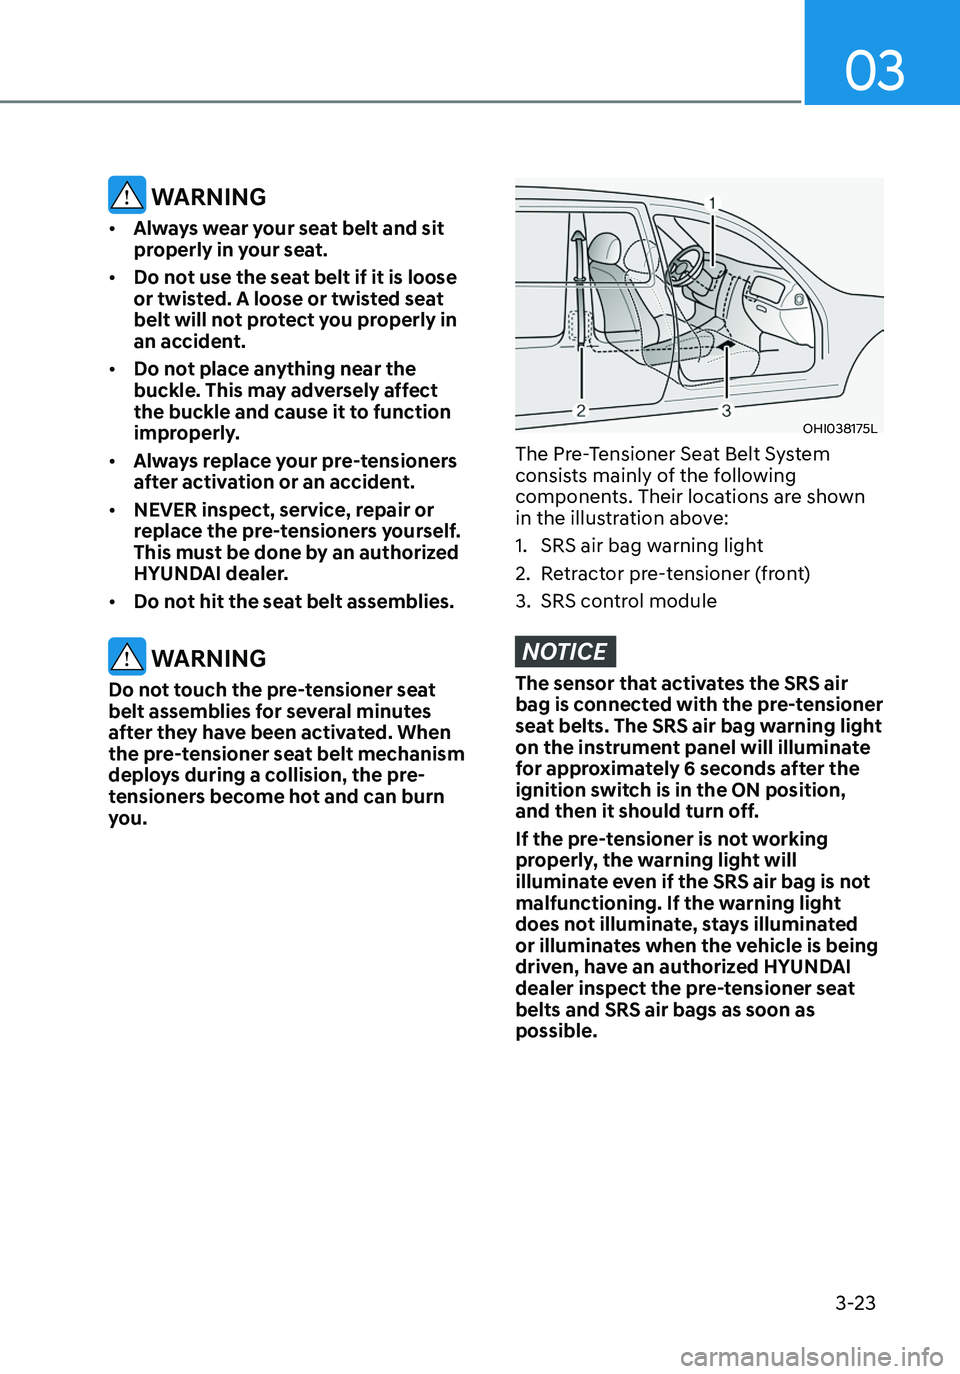 HYUNDAI ELANTRA HYBRID 2021  Owners Manual 03
3-23
 WARNING
•	Always wear your seat belt and sit 
properly in your seat.
•	 Do not use the seat belt if it is loose 
or twisted. A loose or twisted seat 
belt will not protect you properly in